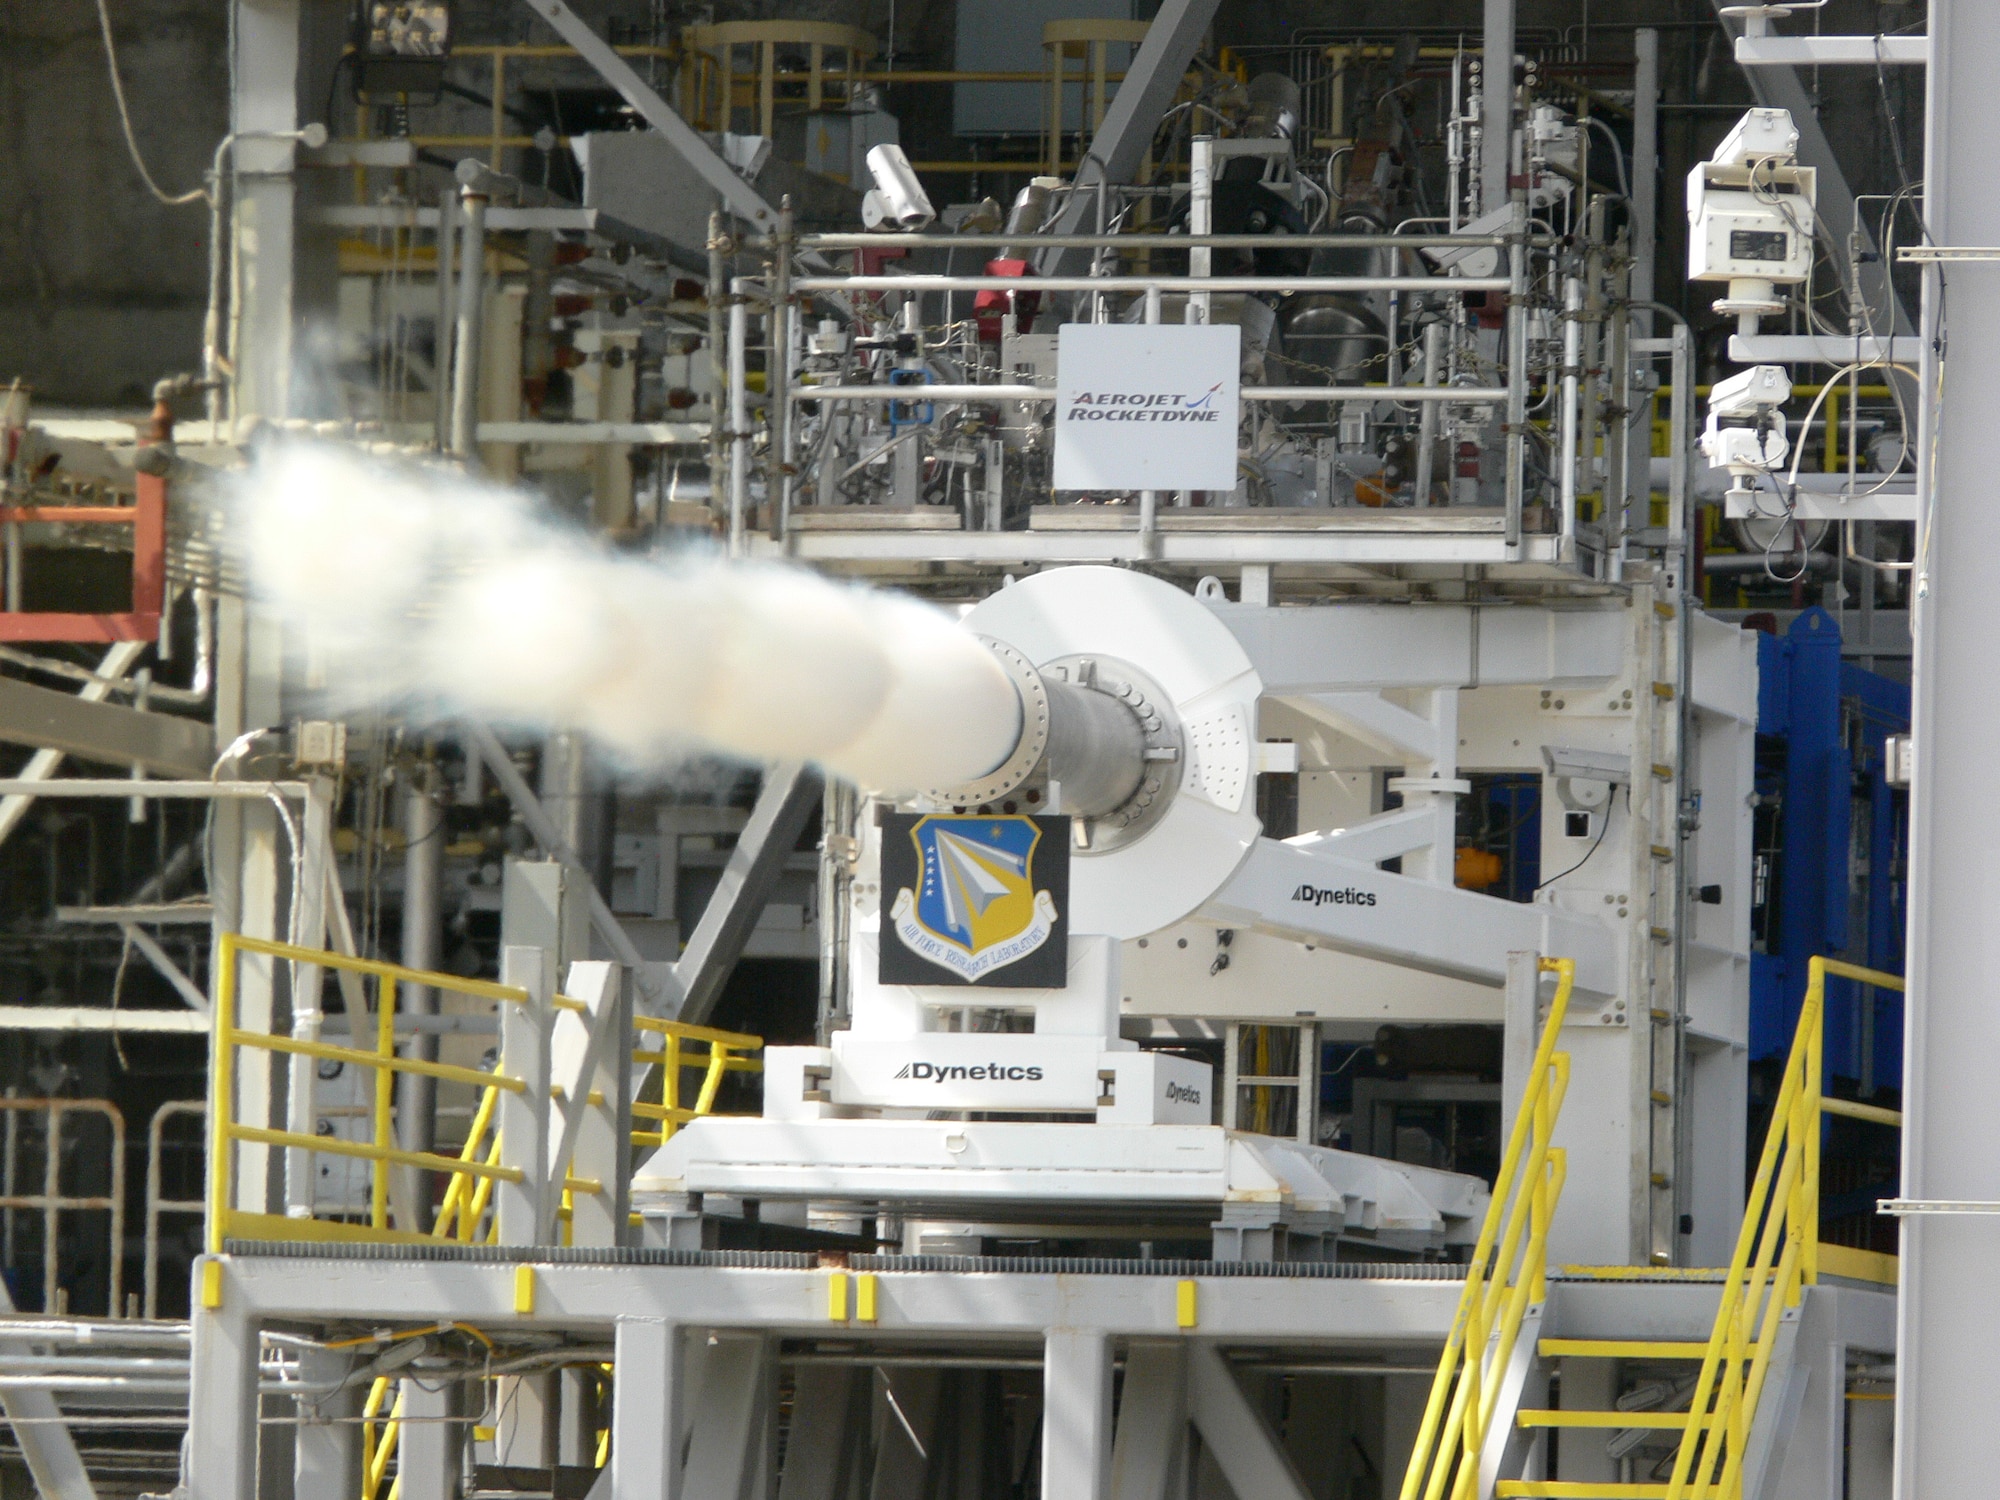 The Air Force Research Laboratory has successfully tested a state-of-the-art rocket engine preburner to elevate the U.S. technology base for high performance oxygen-rich staged combustion. The preburner was designed, developed, and tested under the AFRL Hydrocarbon Boost program with prime contractor Aerojet Rocketdyne, and supported by the Air Force Space and Missile Systems Center. Testing was conducted at NASA Stennis Space Center facilities. (Courtesy photo)